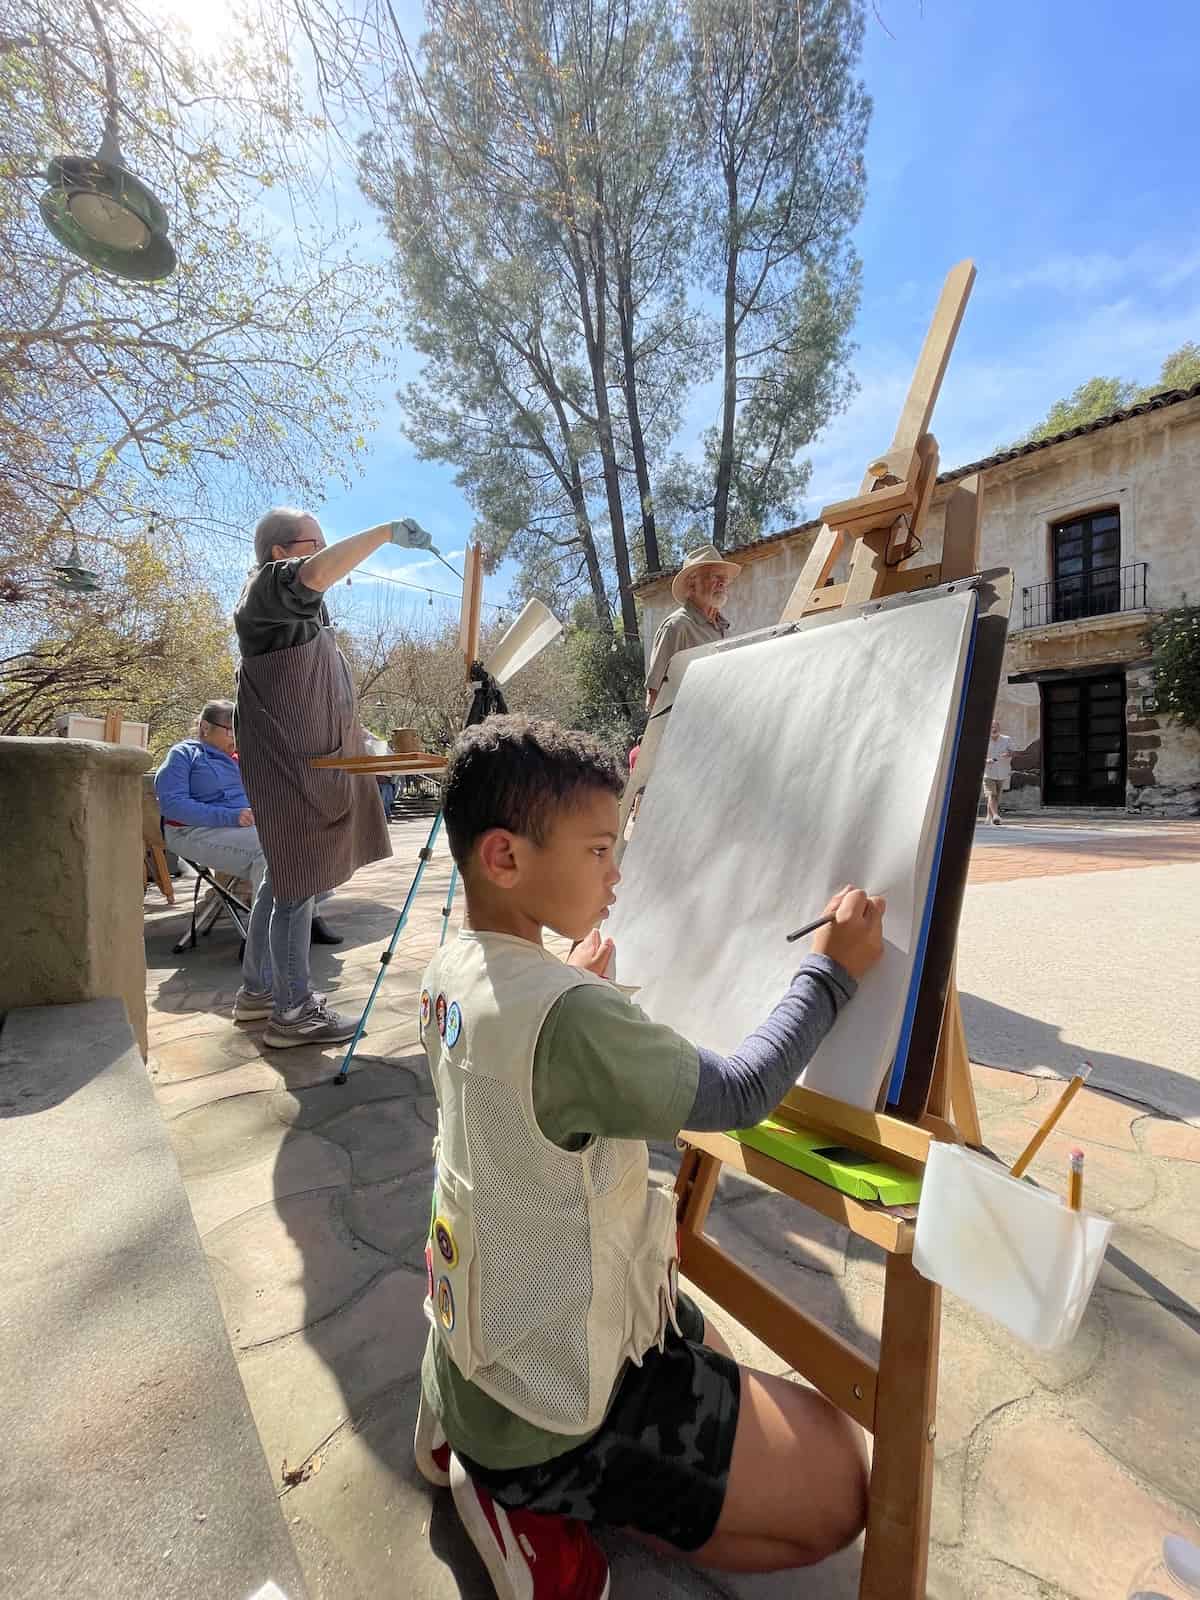 Plein Air painting event - tips for painting outdoors with kids